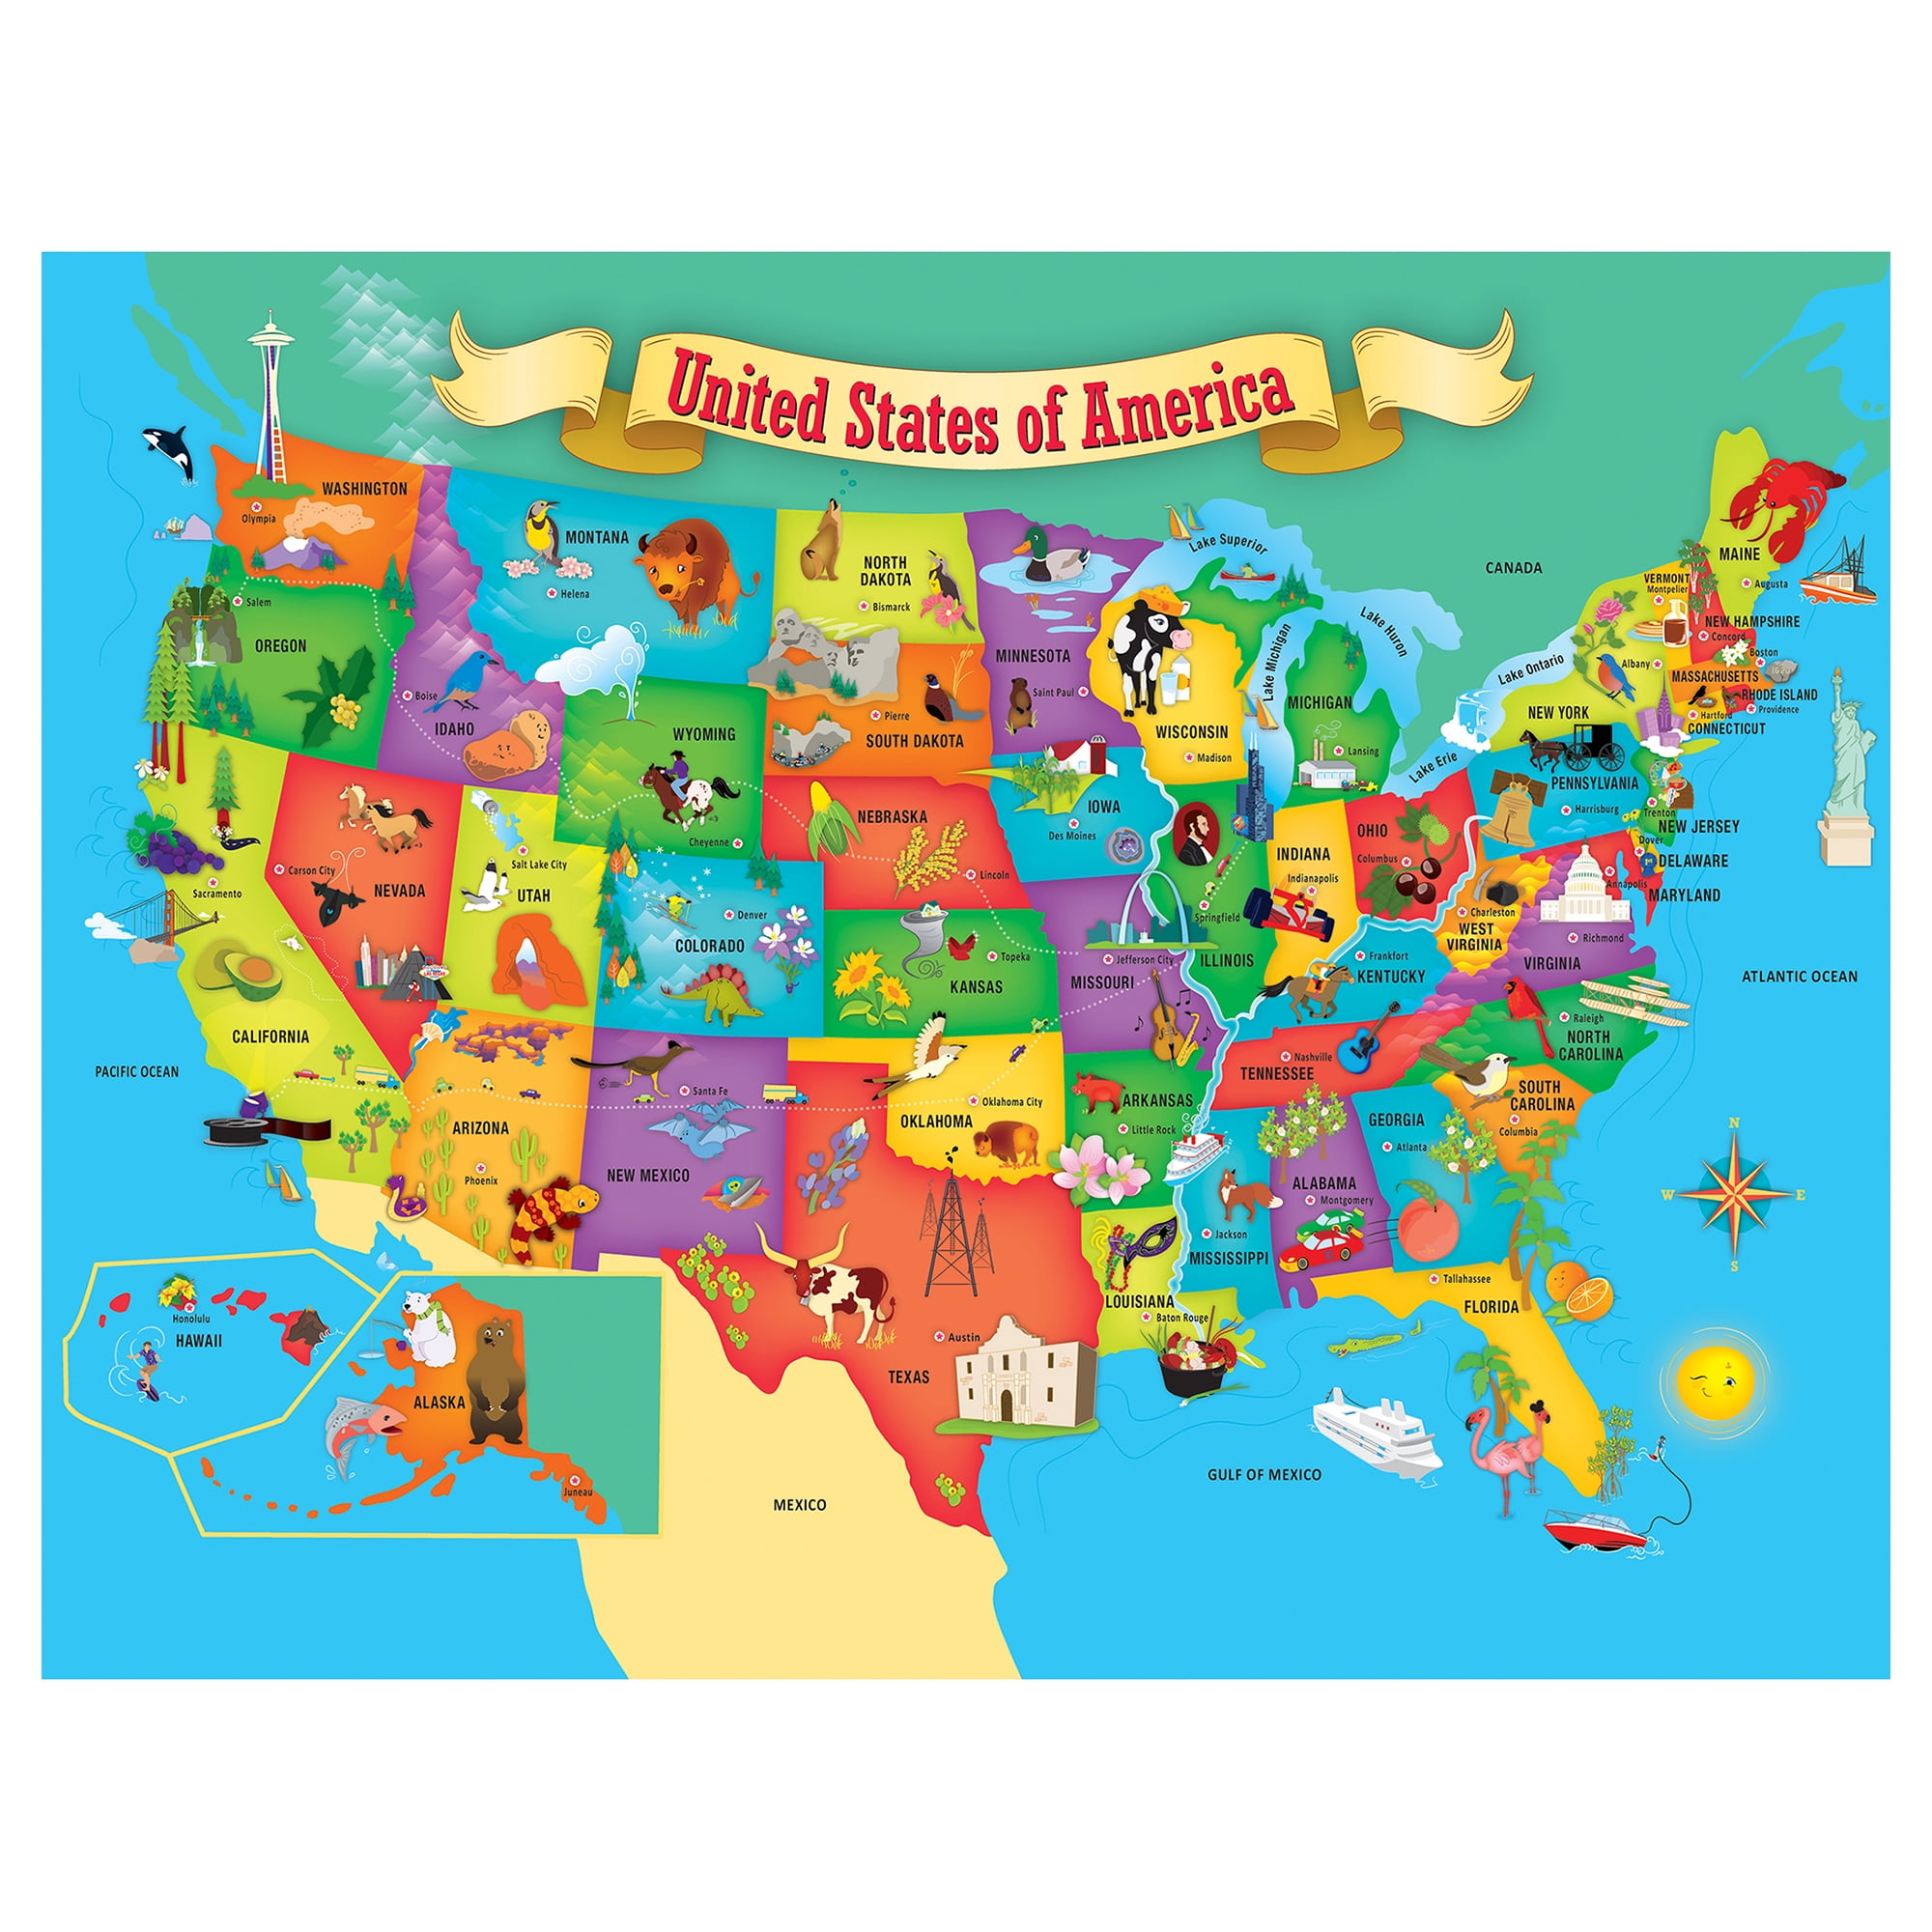 USA MAP UNITED STATES JIGSAW PUZZLE 50 STATES WITH CAPITALS 60-PCS SAME-DAY SHIP